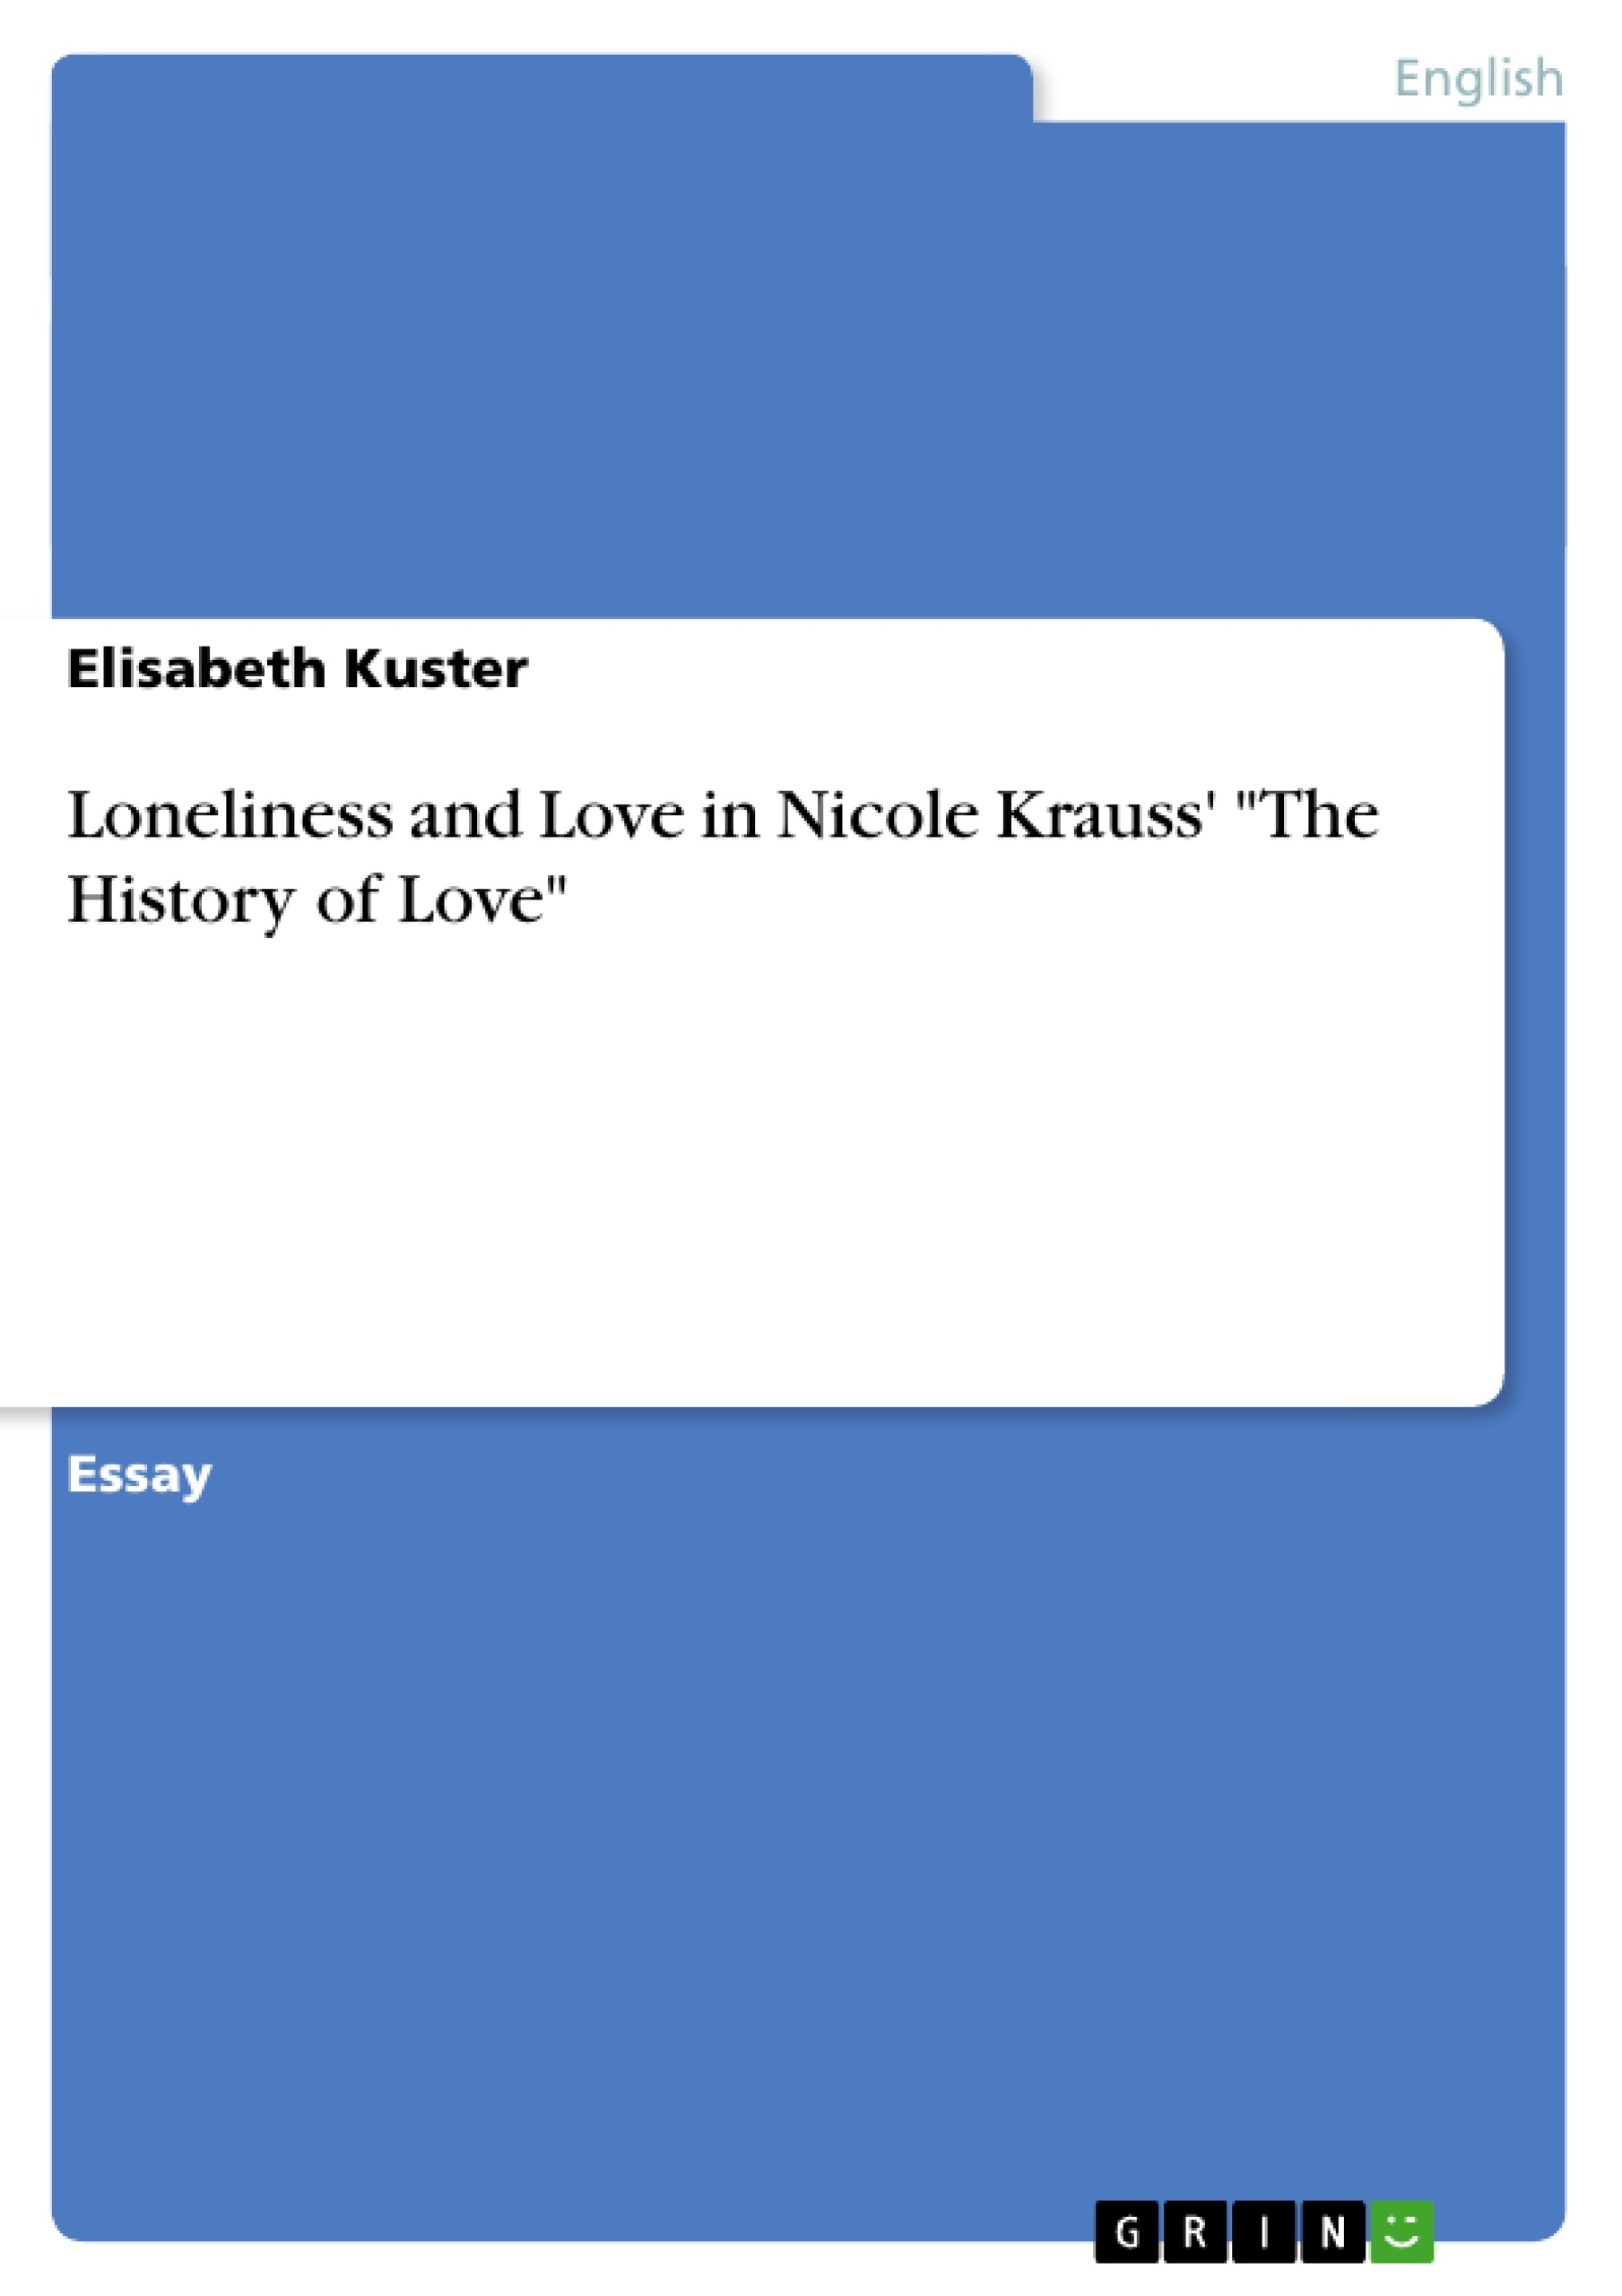 Título: Loneliness and Love in Nicole Krauss' "The History of Love"